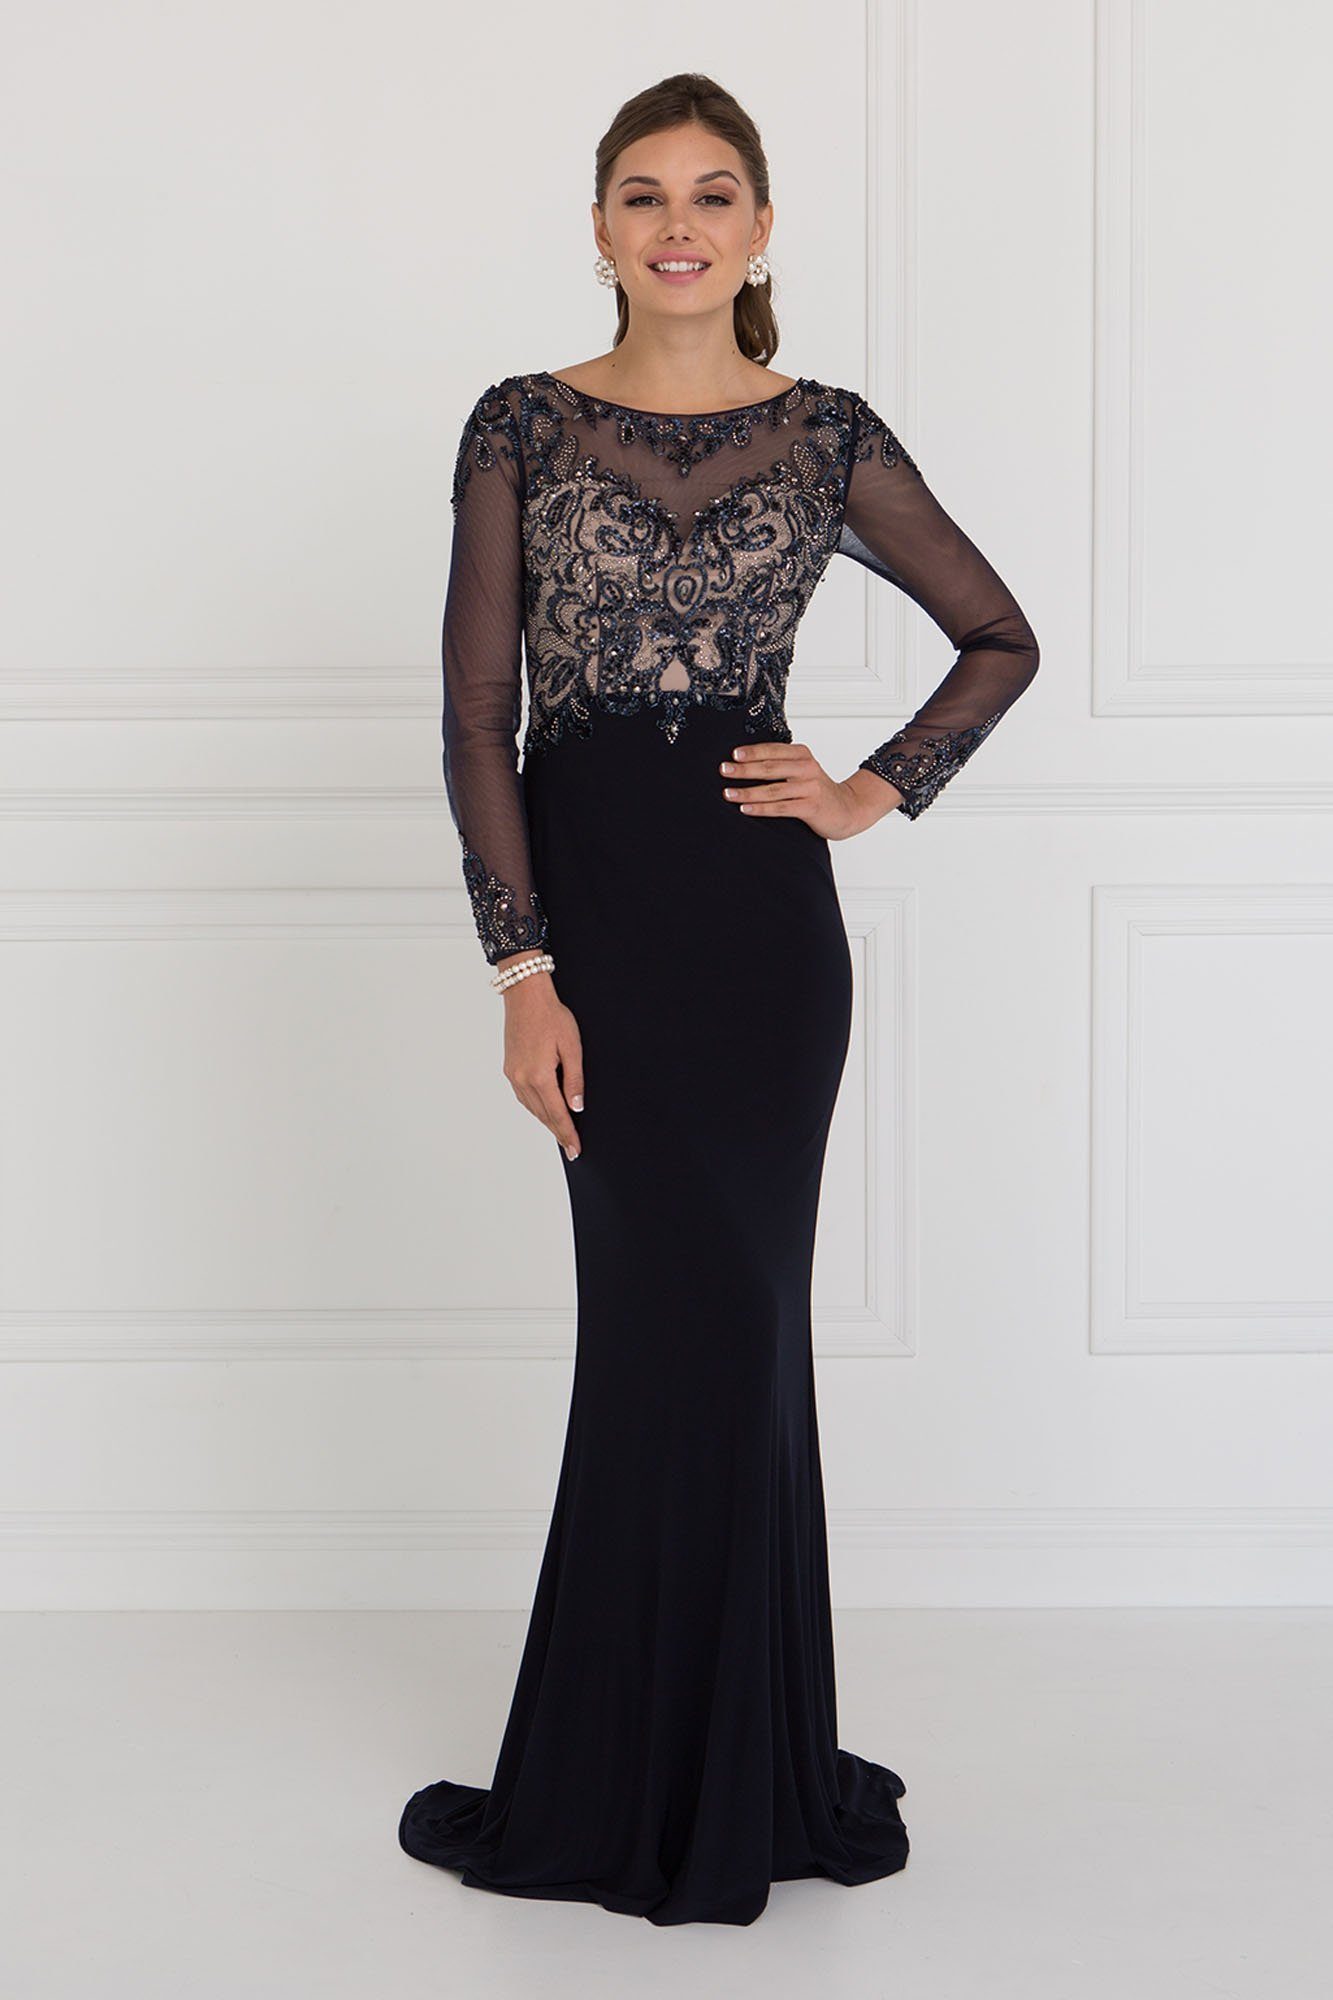 Long sleeve prom dress \u0026 fitted evening 